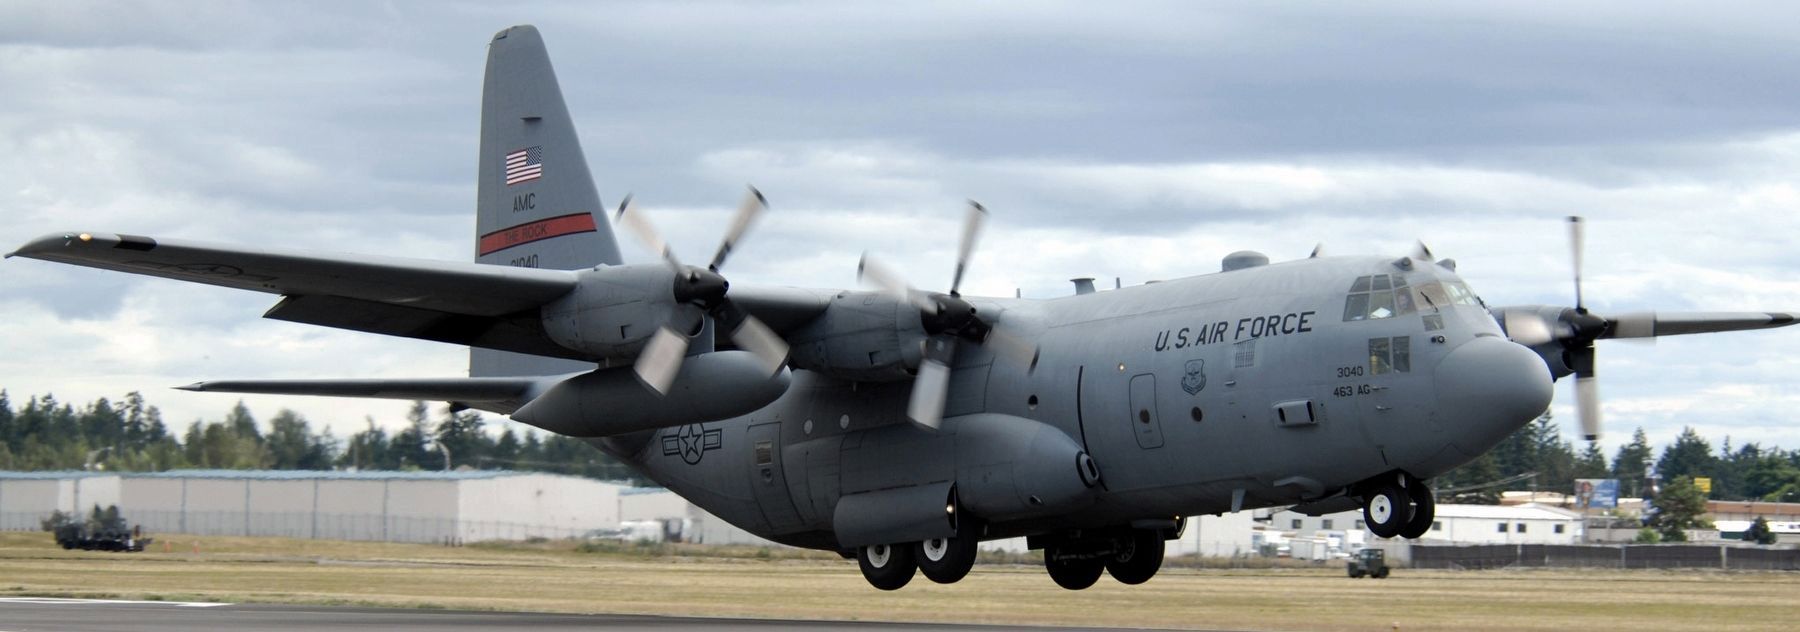 A 463 Airlift Group C-130 Hercules lands at McChord AFB, WA, for Rodeo 2007 image. Click for full size.